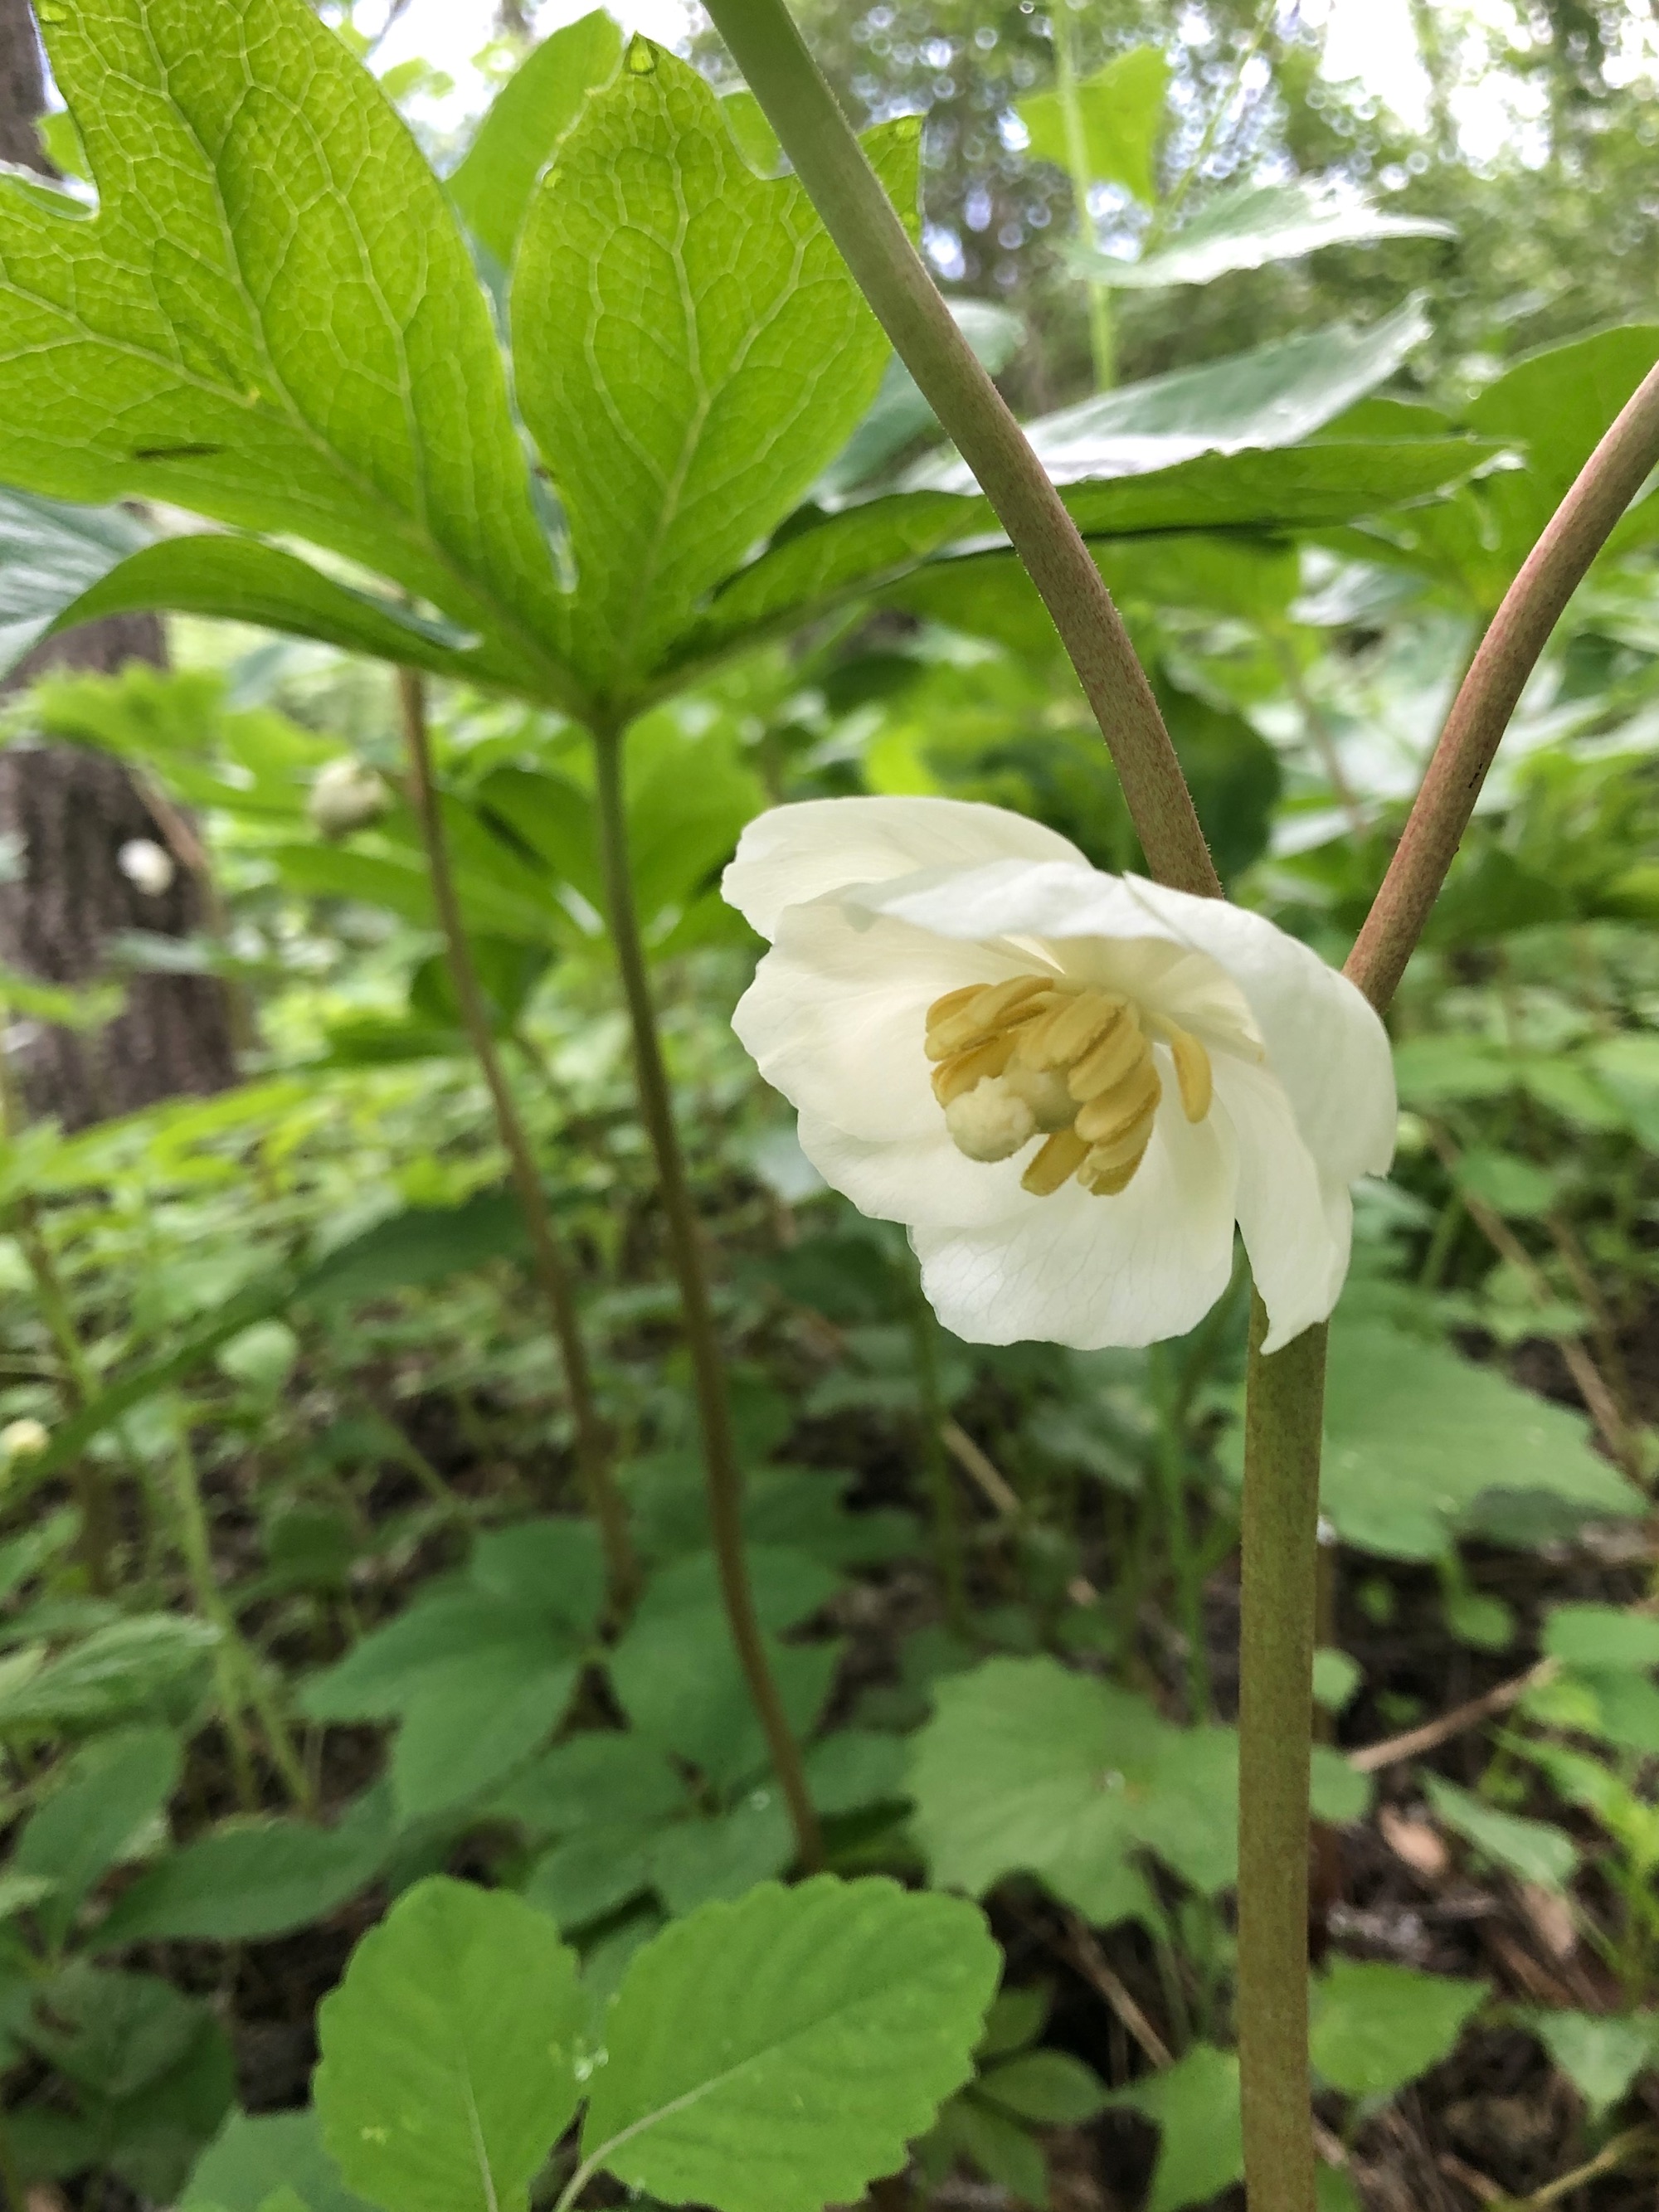 Mayapple blooms in wood between Duck Pond and Marion Dunn in Madison, Wisconsin on May 23, 2020.